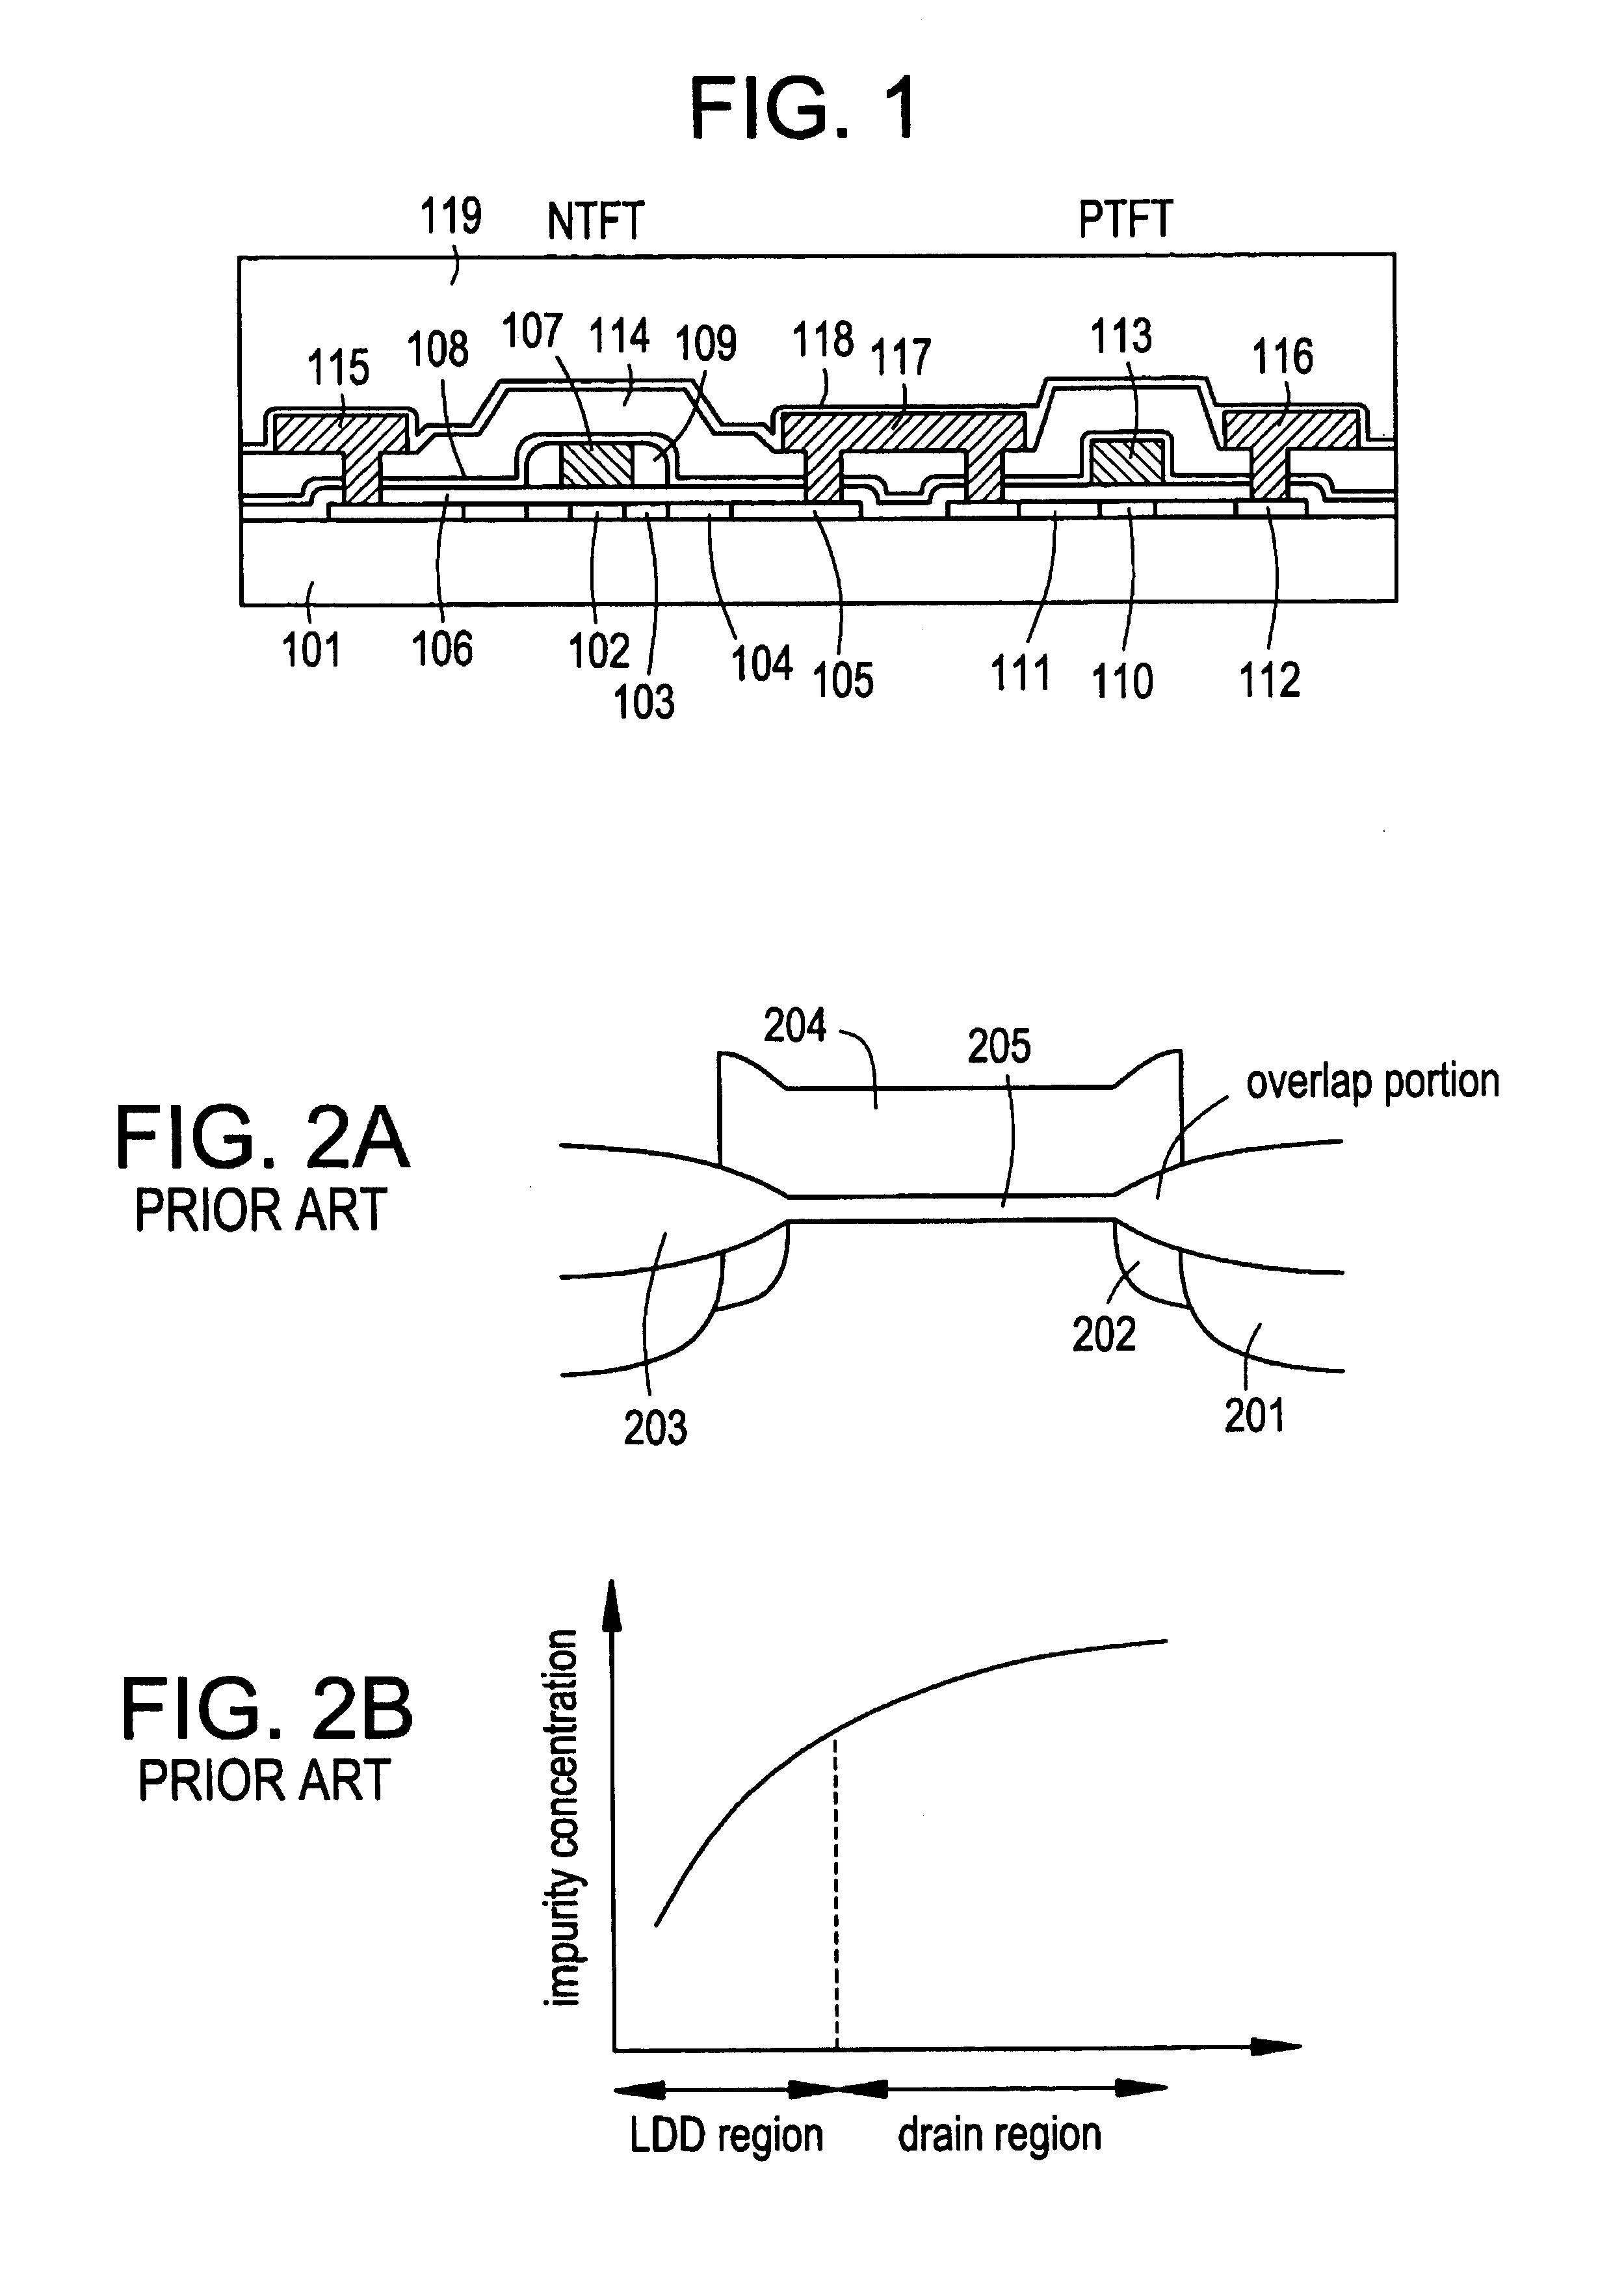 Semiconductor device having an impurity gradient in the impurity regions and method of manufacture